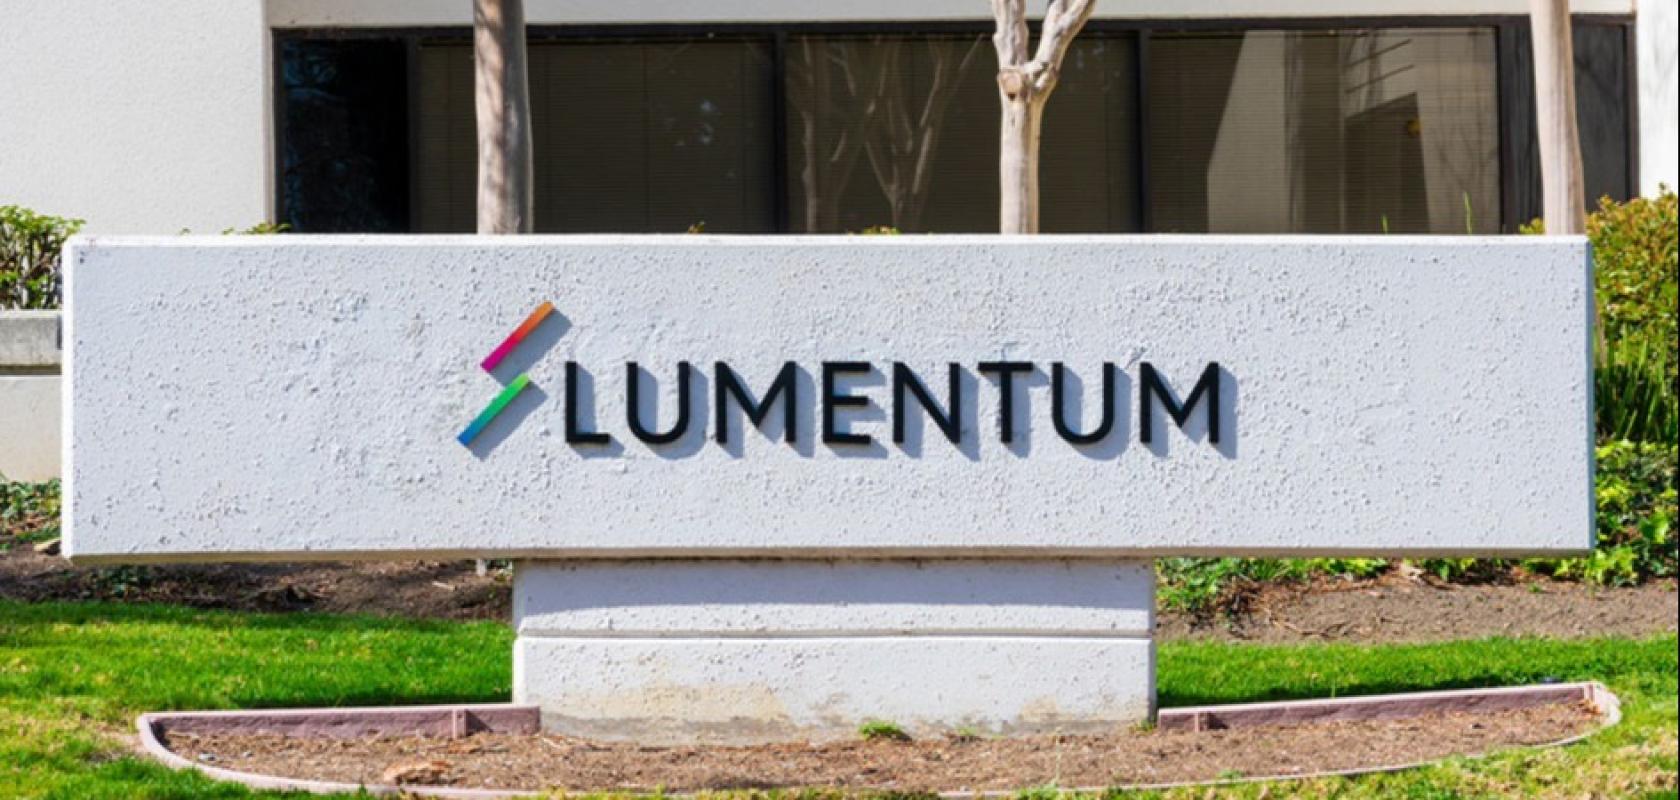 Lumentum have had a $750 million deal agreed for Cloud Light, as they make moves while the demand for cloud-based solutions continues to grow (Image: Nasdaq)